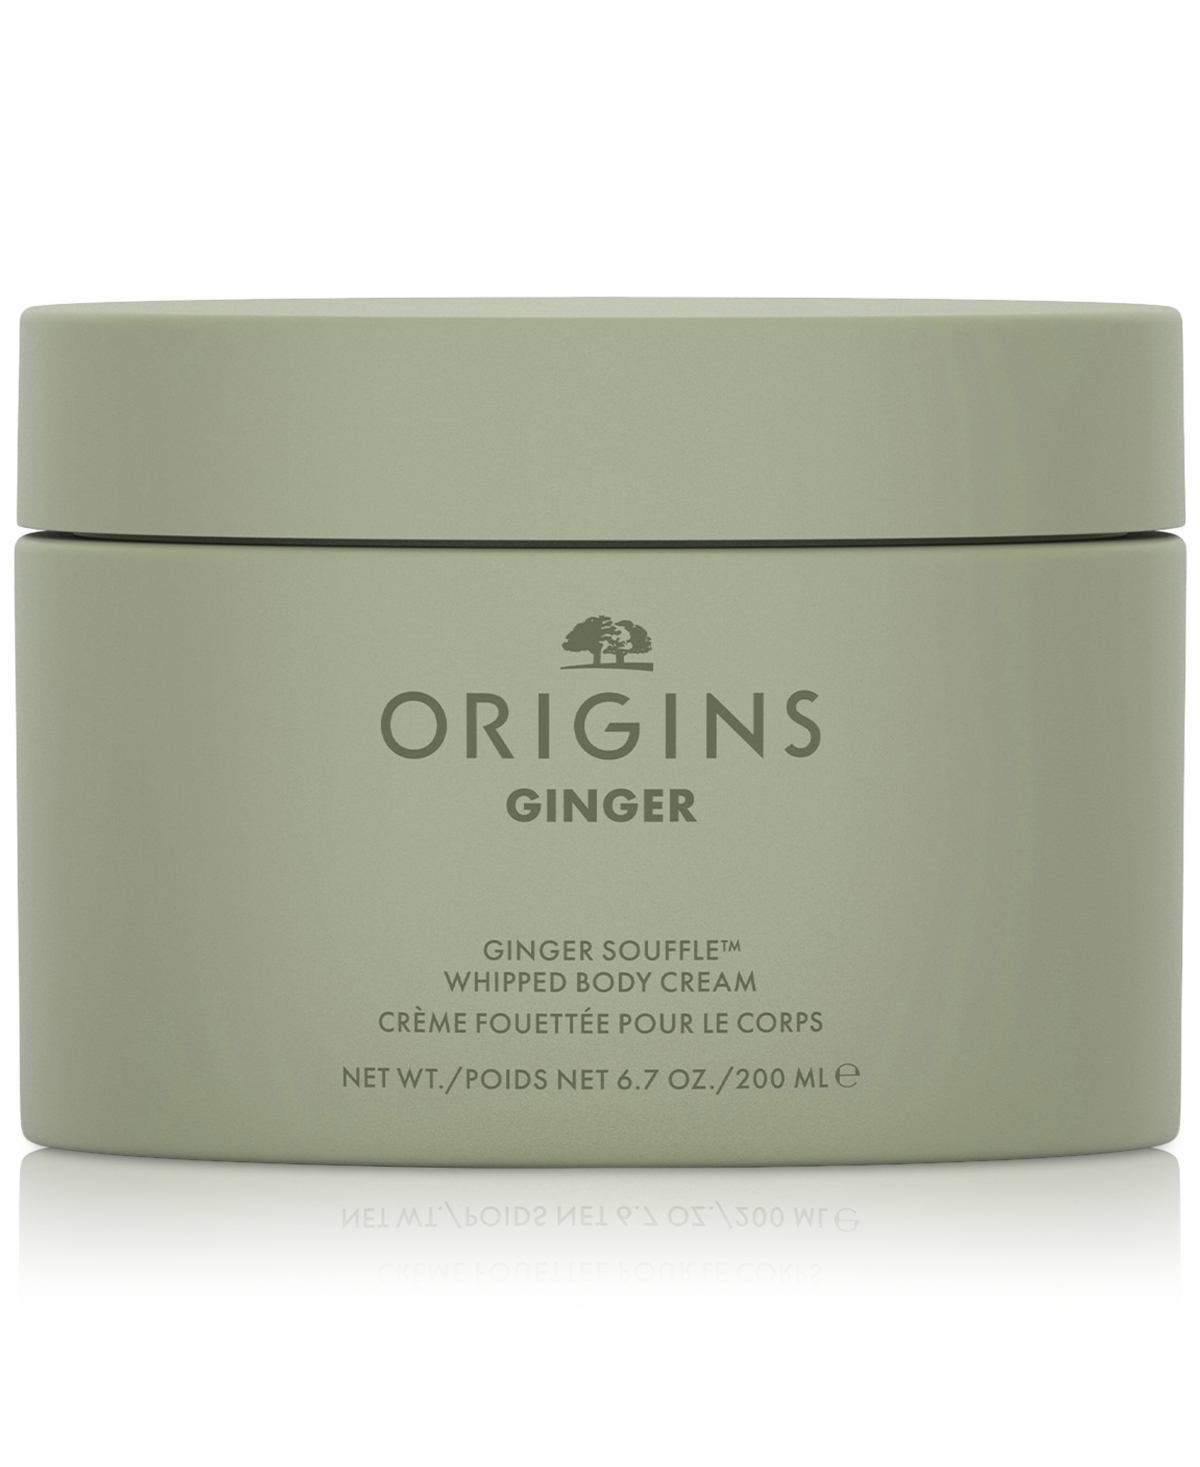 Origins Ginger Souffle Whipped Body Cream, 200 ml In No Color